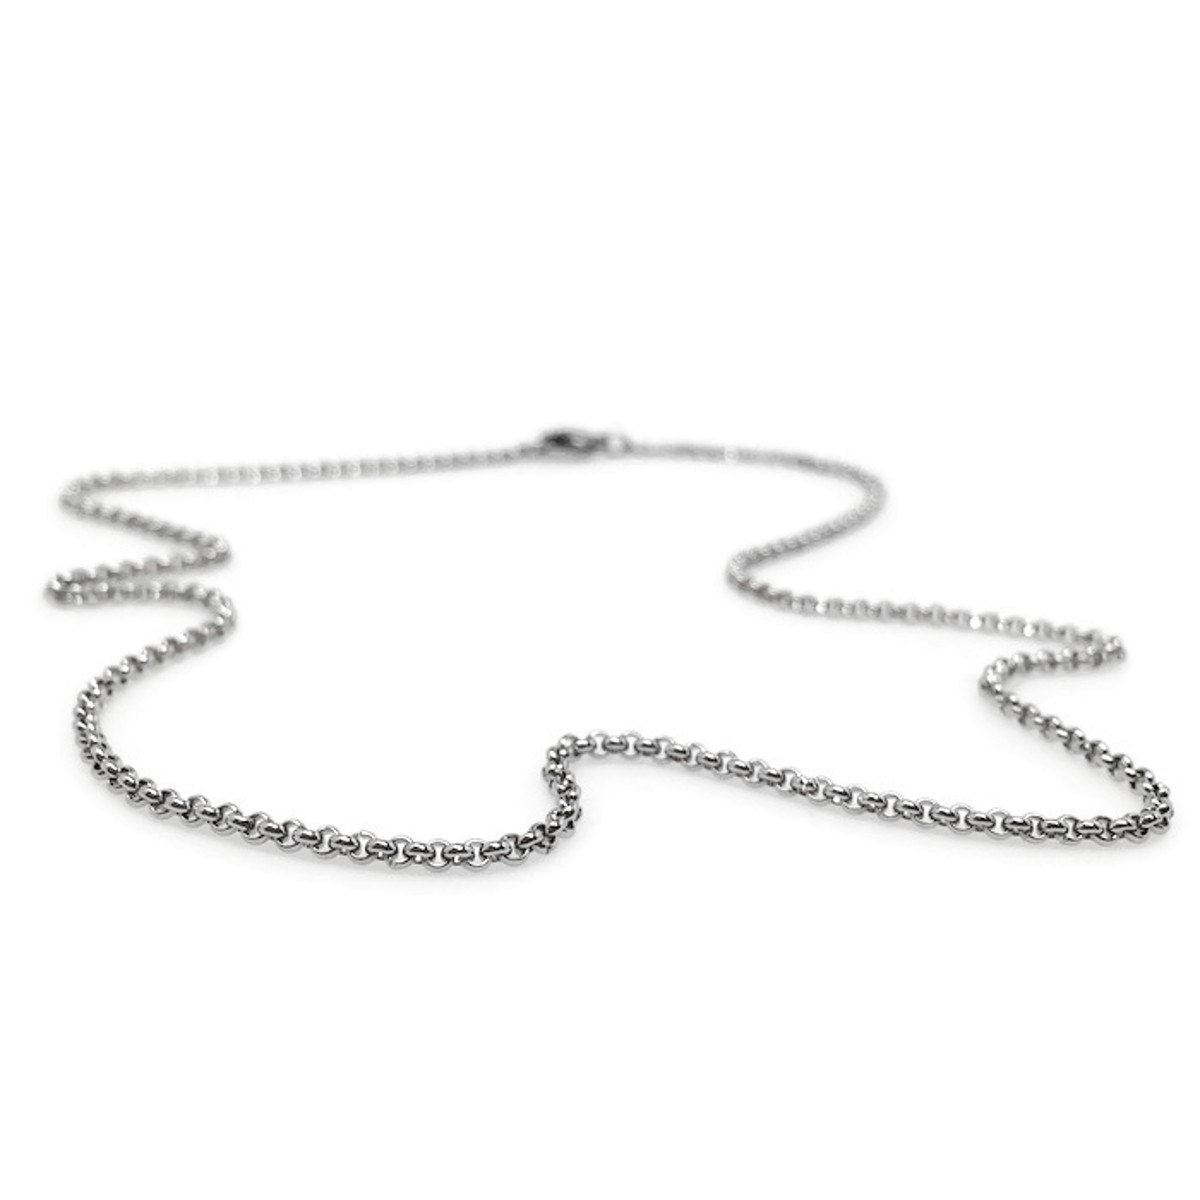 Stainless Steel Necklace Chain, 2mm, Lobster Clasp Closure, Rolo Chain, Hypoallergenic Jewelry